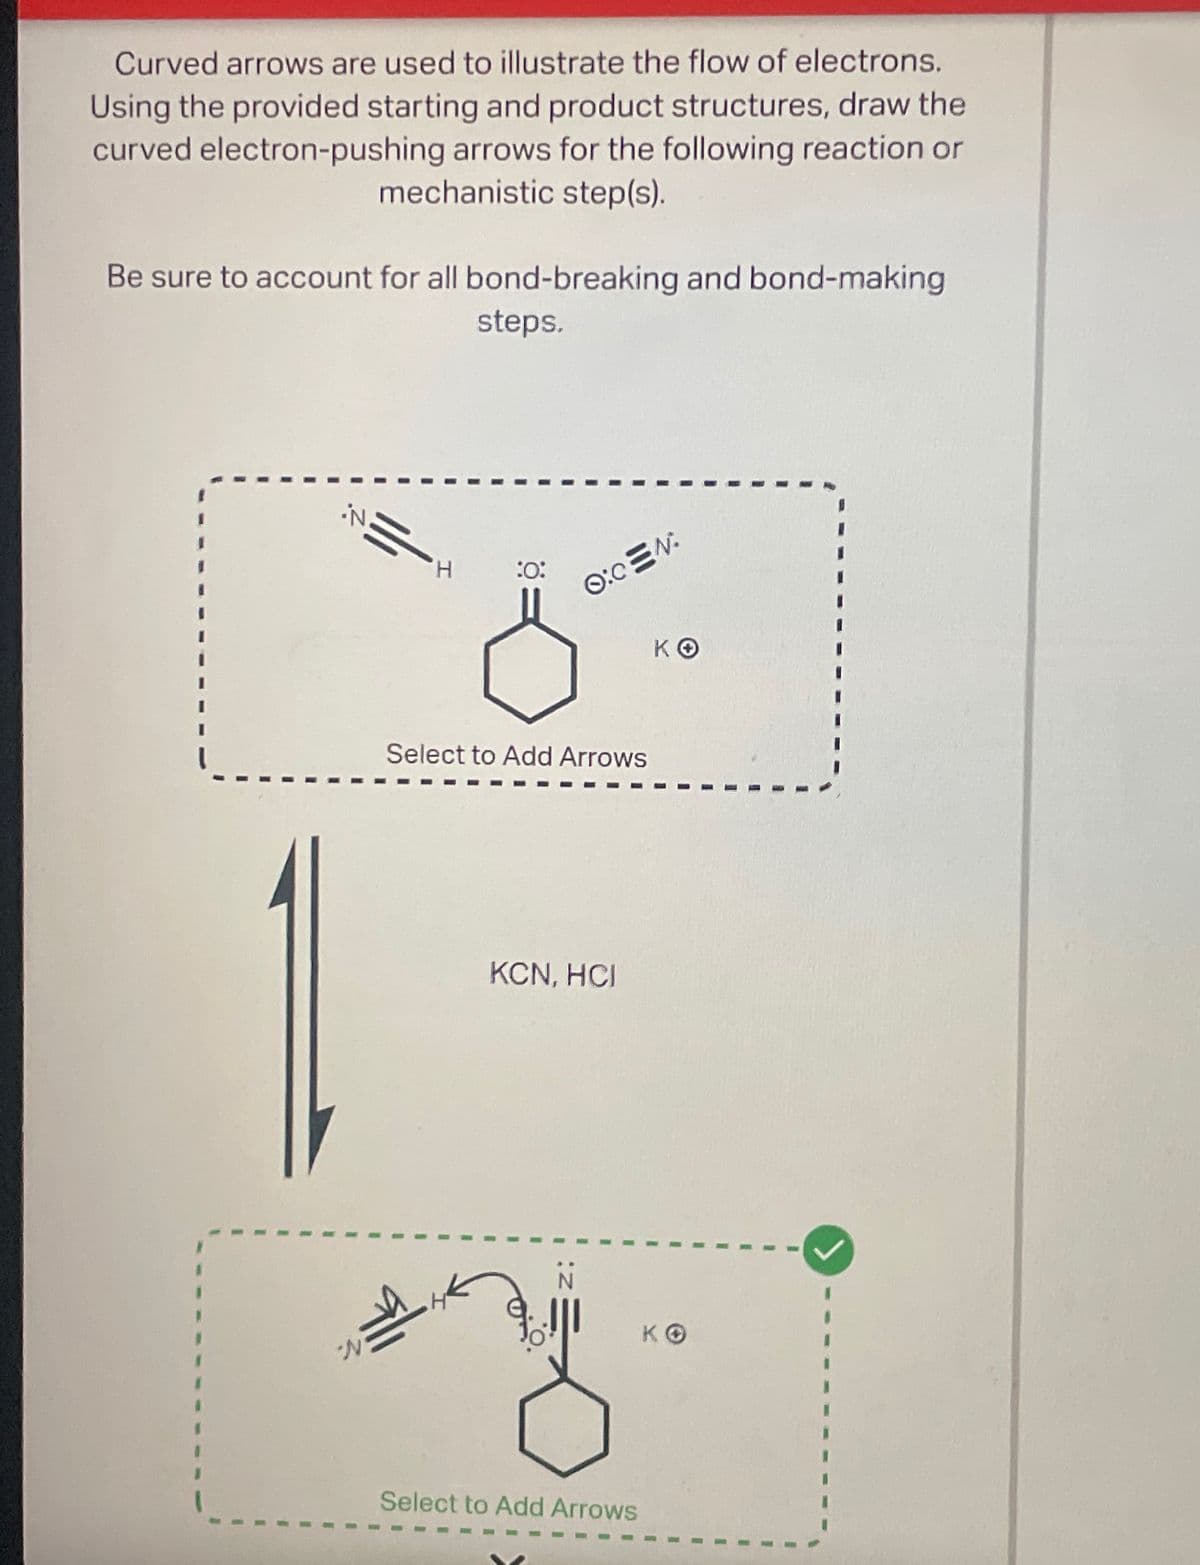 Curved arrows are used to illustrate the flow of electrons.
Using the provided starting and product structures, draw the
curved electron-pushing arrows for the following reaction or
mechanistic step(s).
Be sure to account for all bond-breaking and bond-making
steps.
N.
H
:0:
O:CEN:
KO
Select to Add Arrows
KCN, HOI
Select to Add Arrows
KO